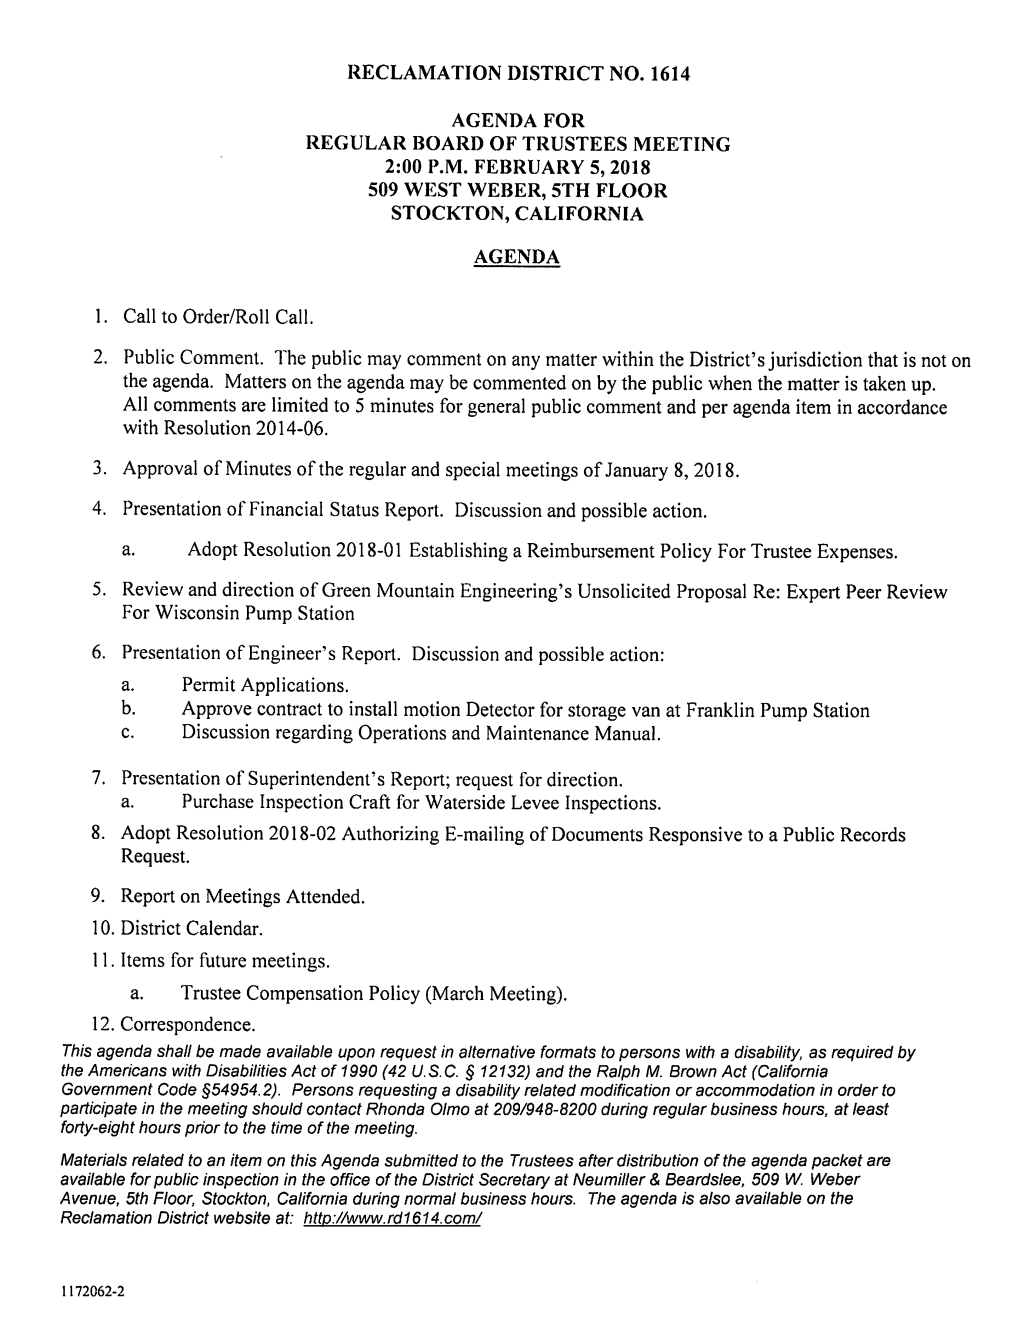 Reclamation District No. 1614 Agenda for Regular Board of Trustees Meeting 2:00 P.M. February 5, 2018 509 West Weber, 5Th Floor